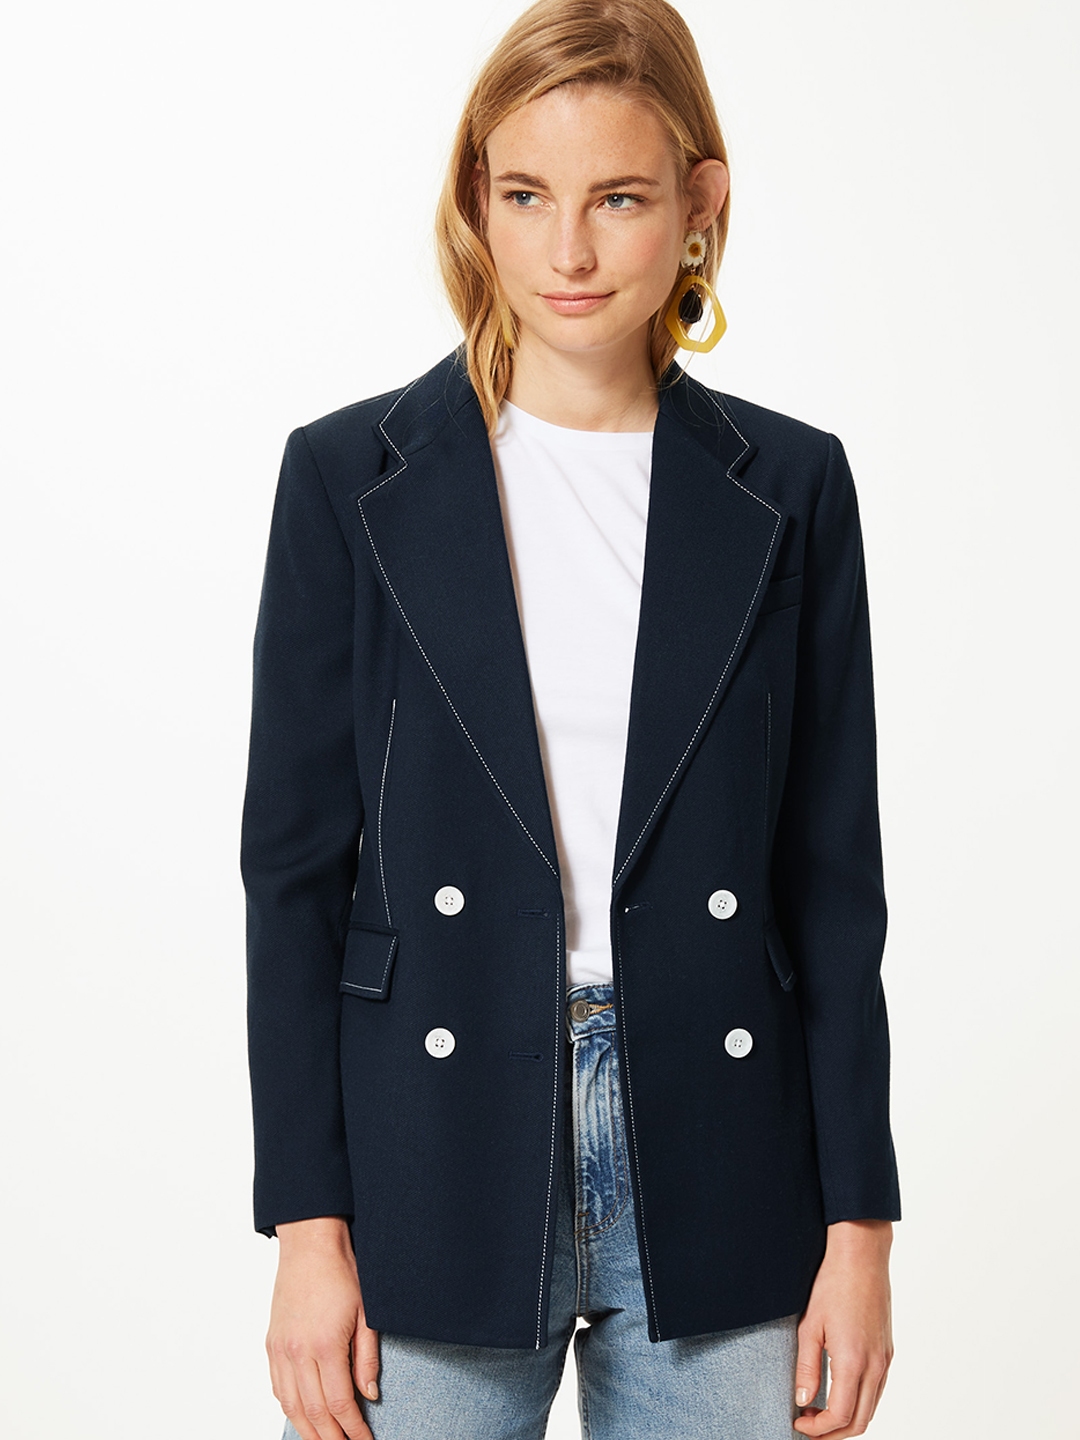 Buy Marks & Spencer Women Navy Blue Solid Tailored Jacket - Jackets for Women 8699223 | Myntra